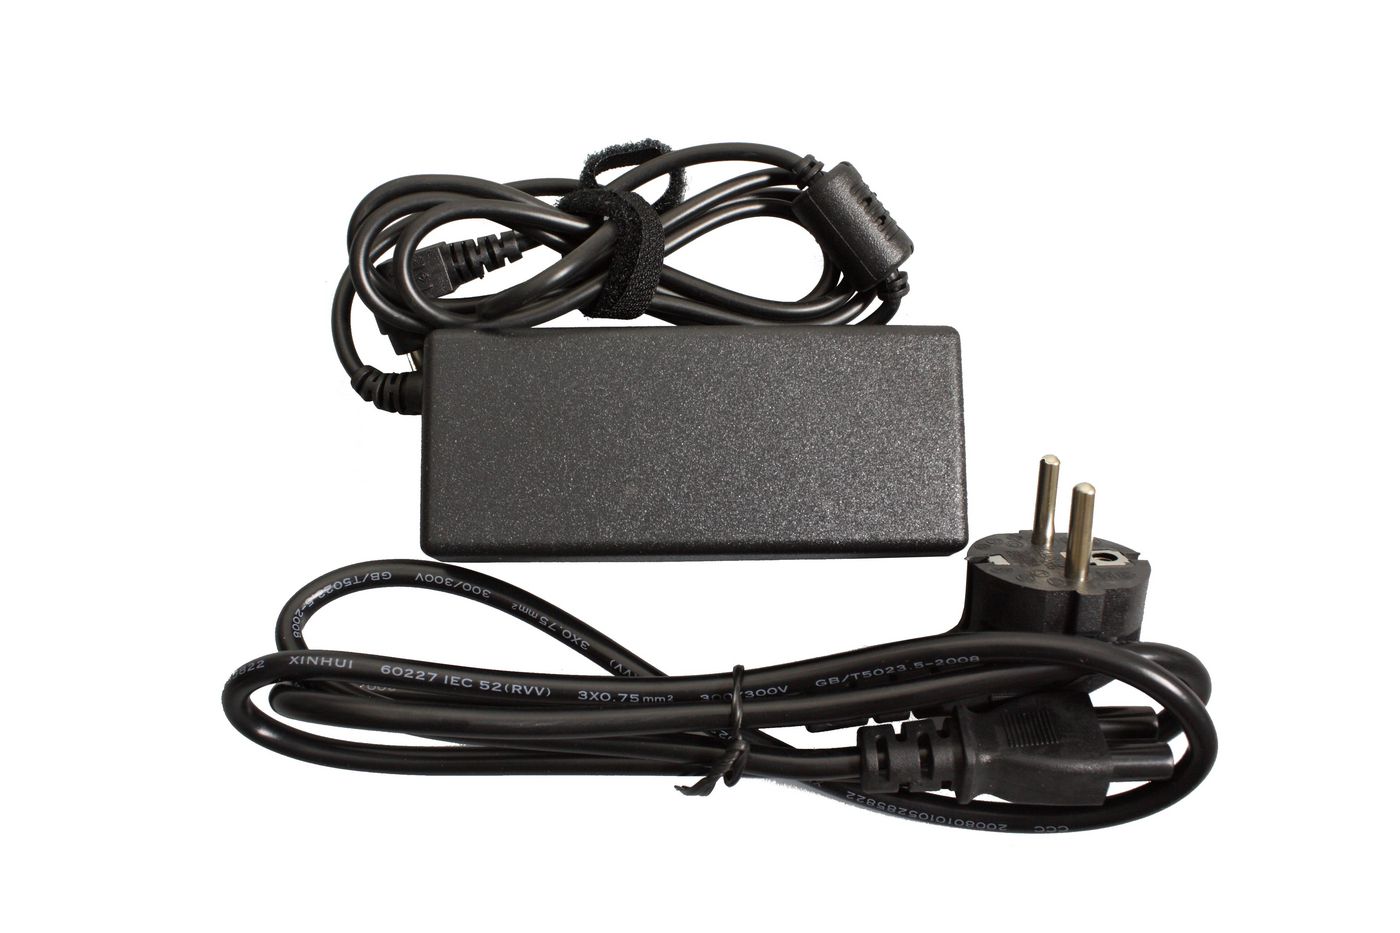 CoreParts MBA1249 Power Adapter for Cisco 